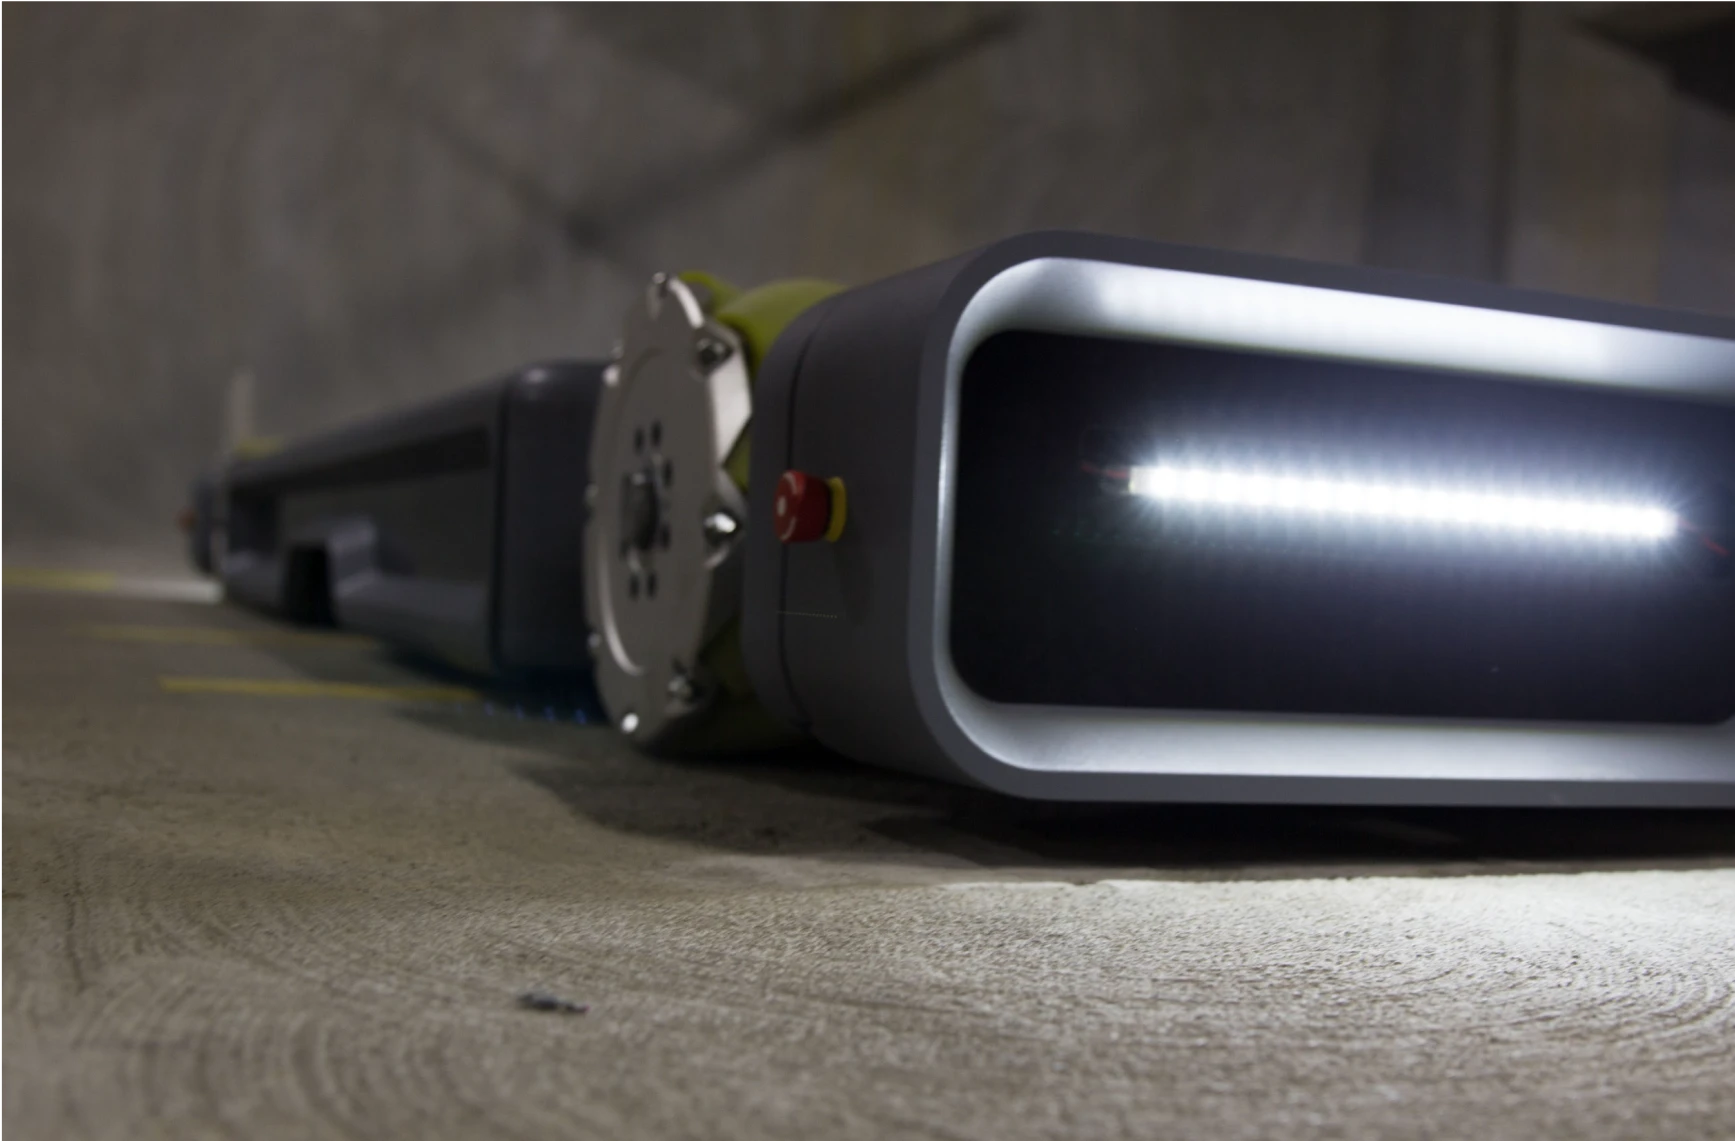 Close-up of an electric autonomous car parking robot, shown from a low angle in a parking garage, focusing on the front of the robot with lights illuminated.